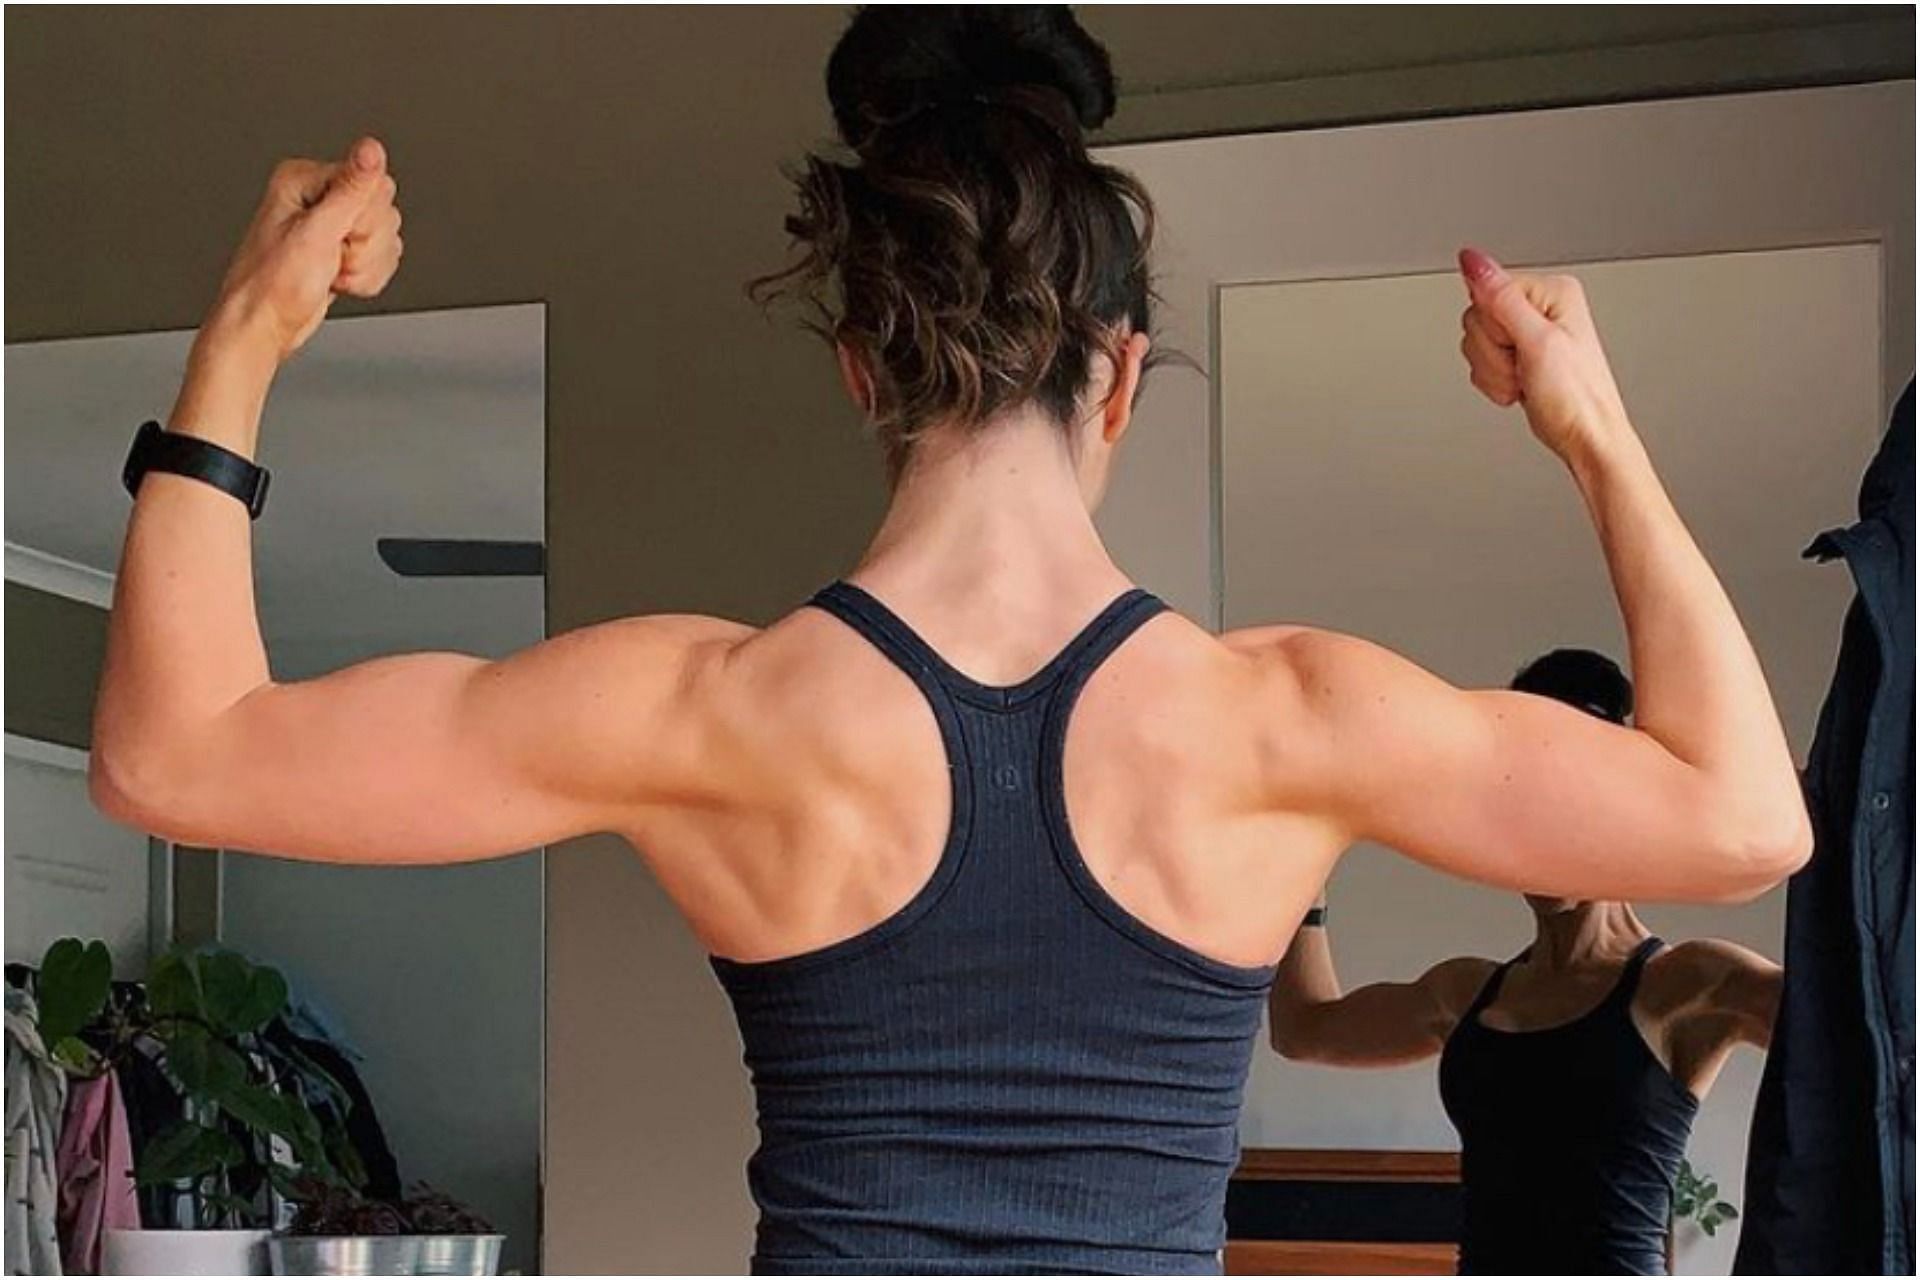 Rear delt exercises is important to improve posture. (Image by @coachgemma/Instagram)